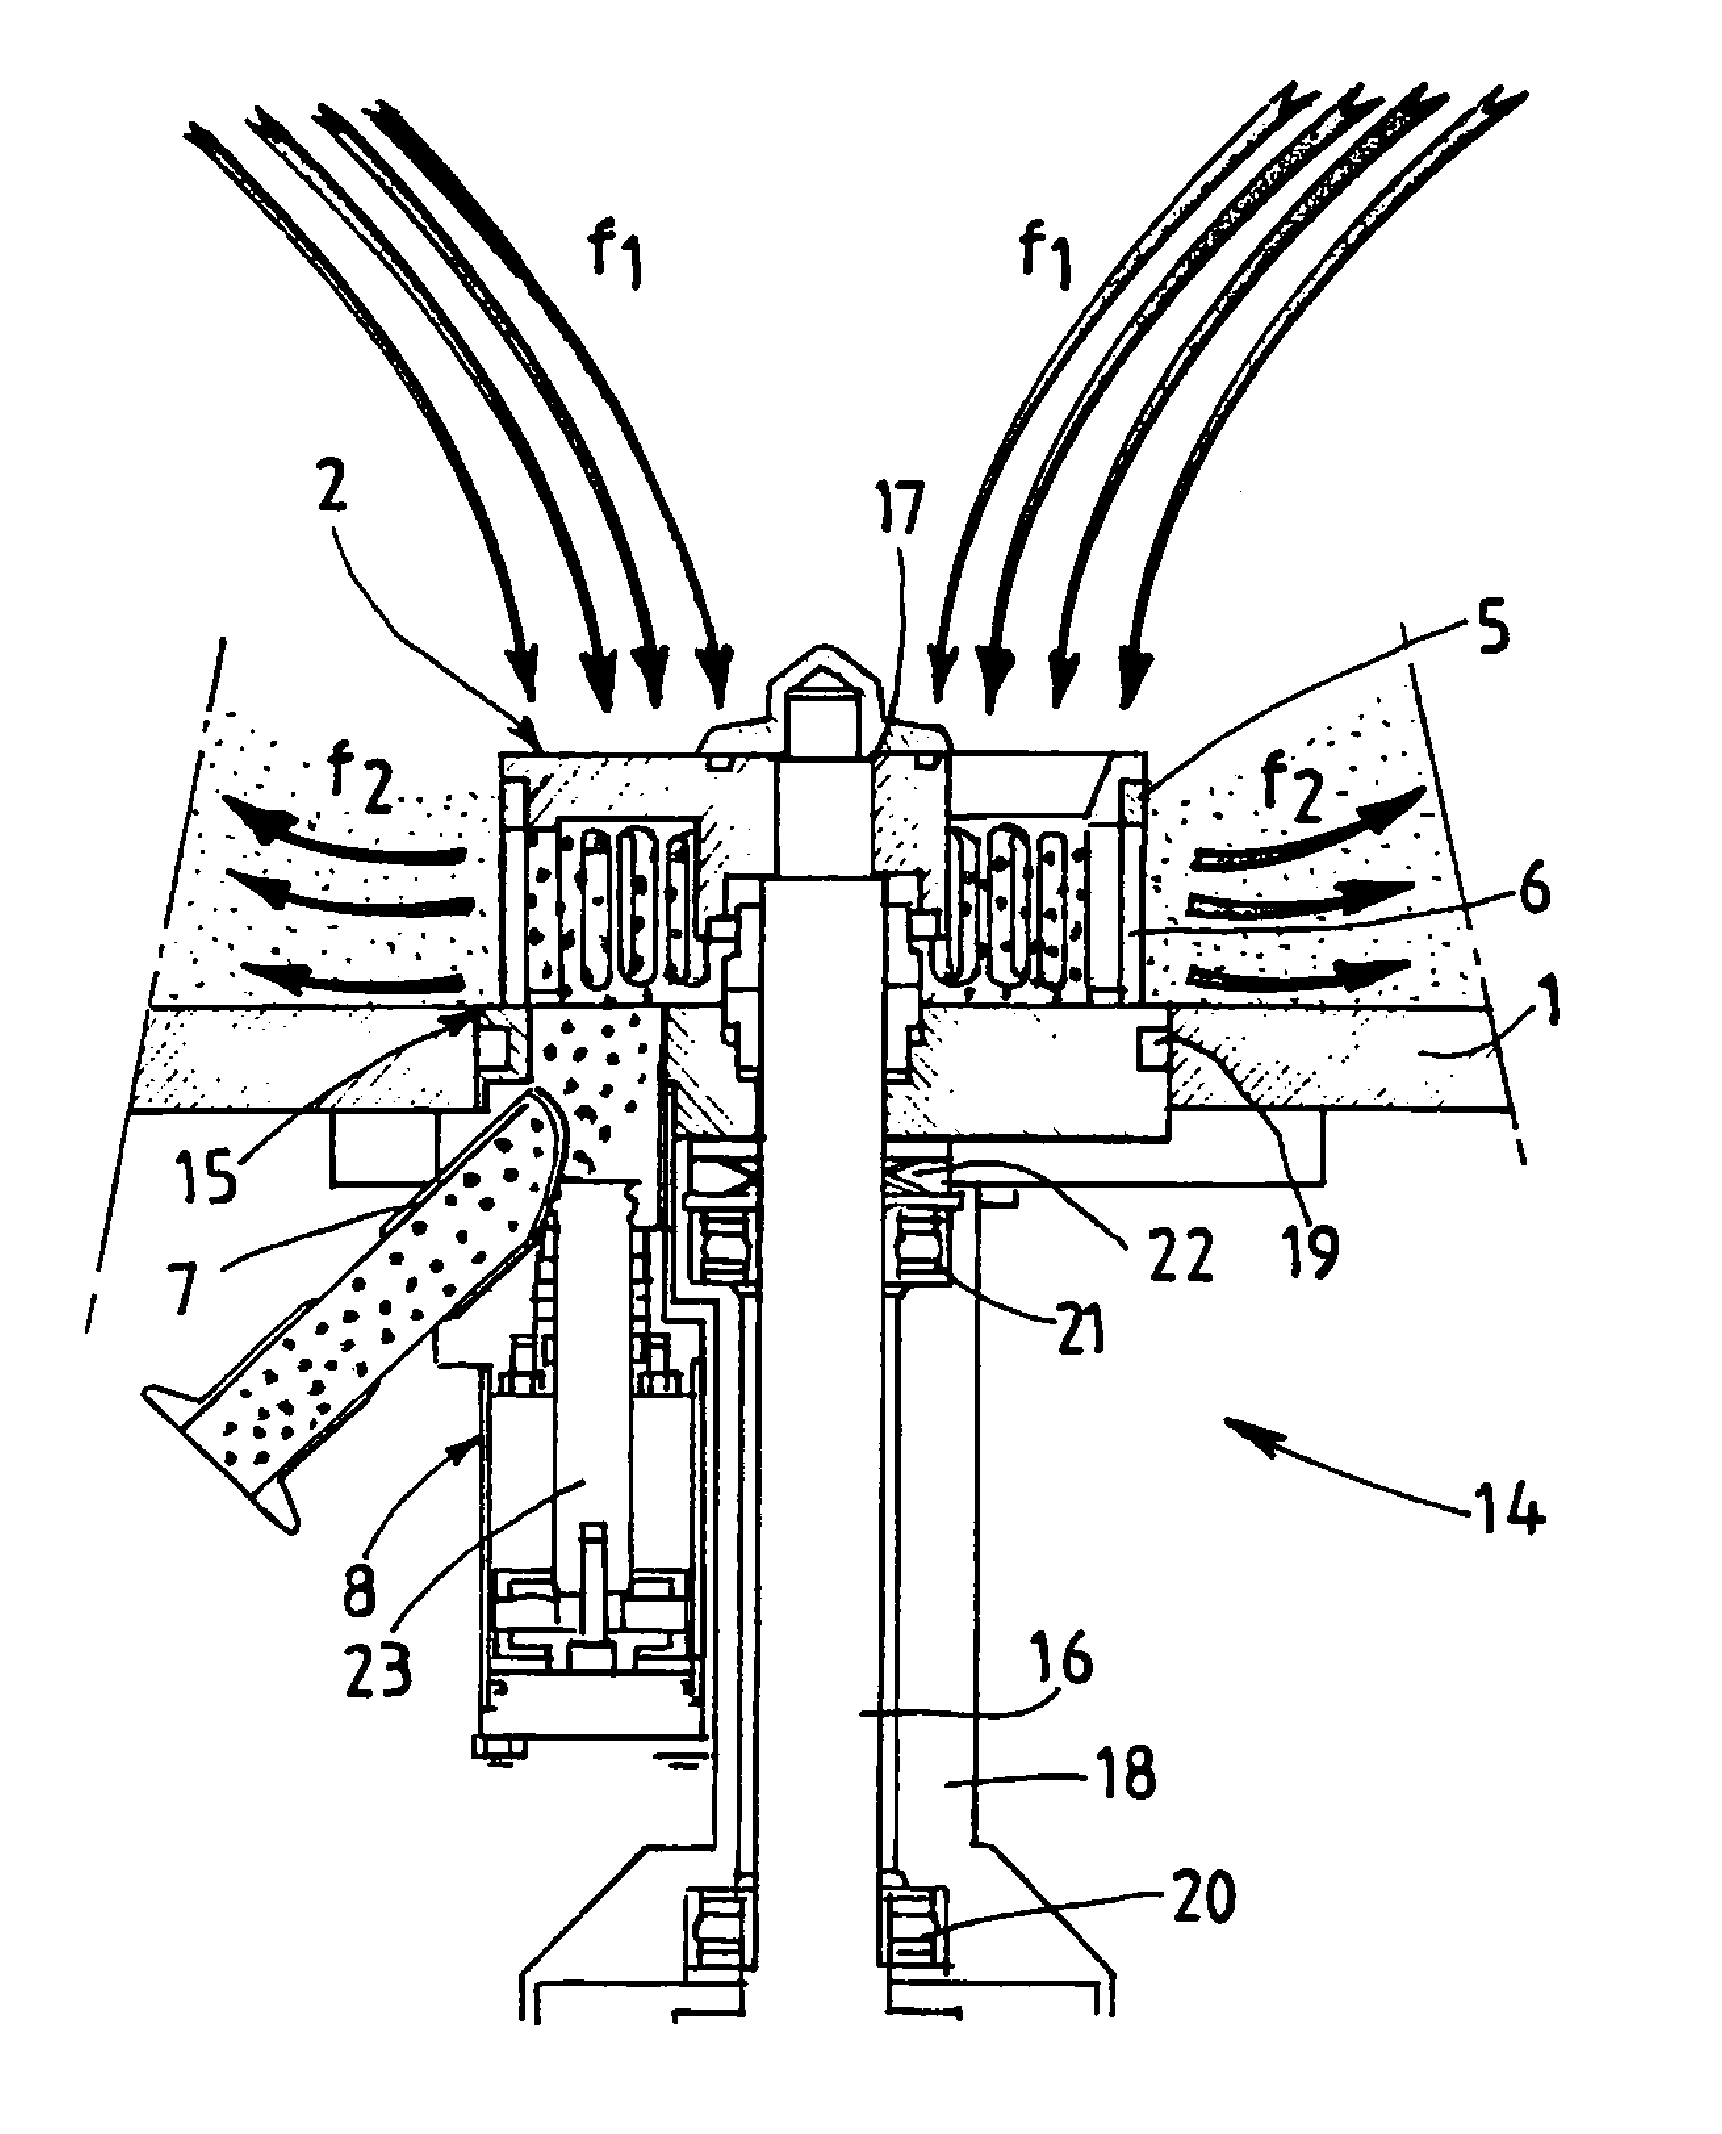 Blender assembly for producing a vacuum inside a vat and method for dispensing particles therein